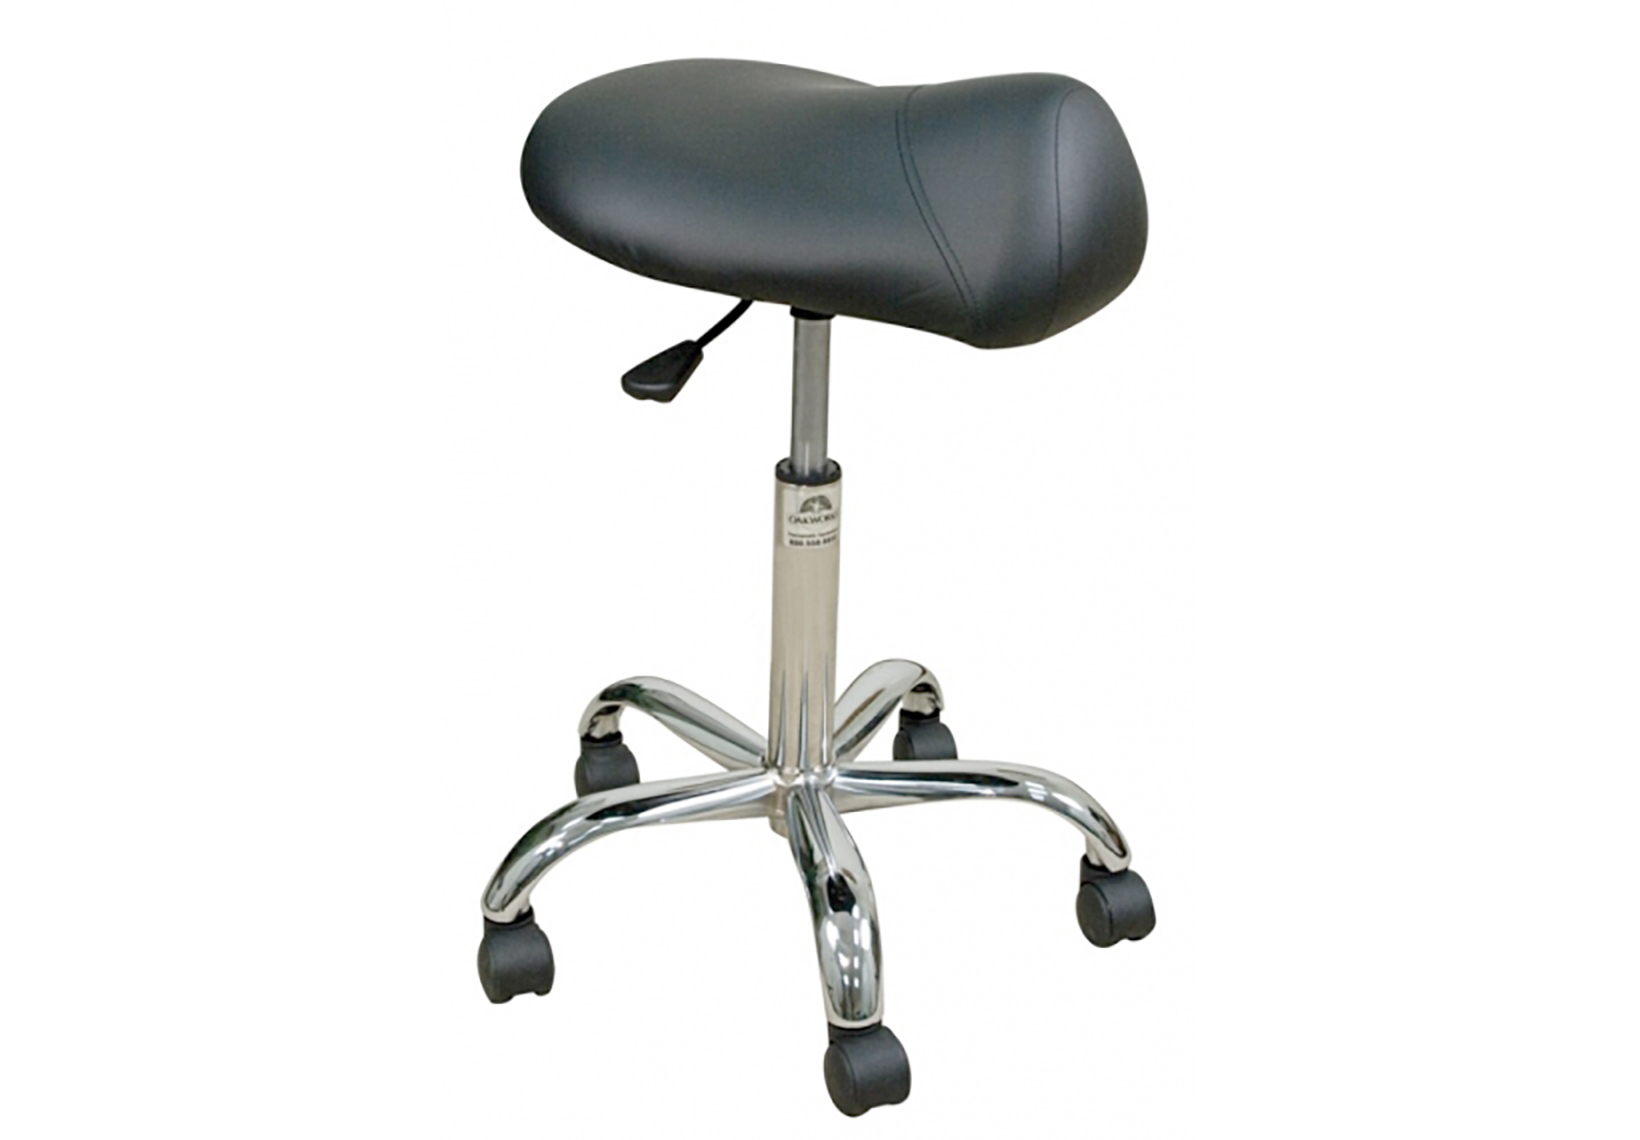 Professional Stool with Saddle Seat - Low Height Range